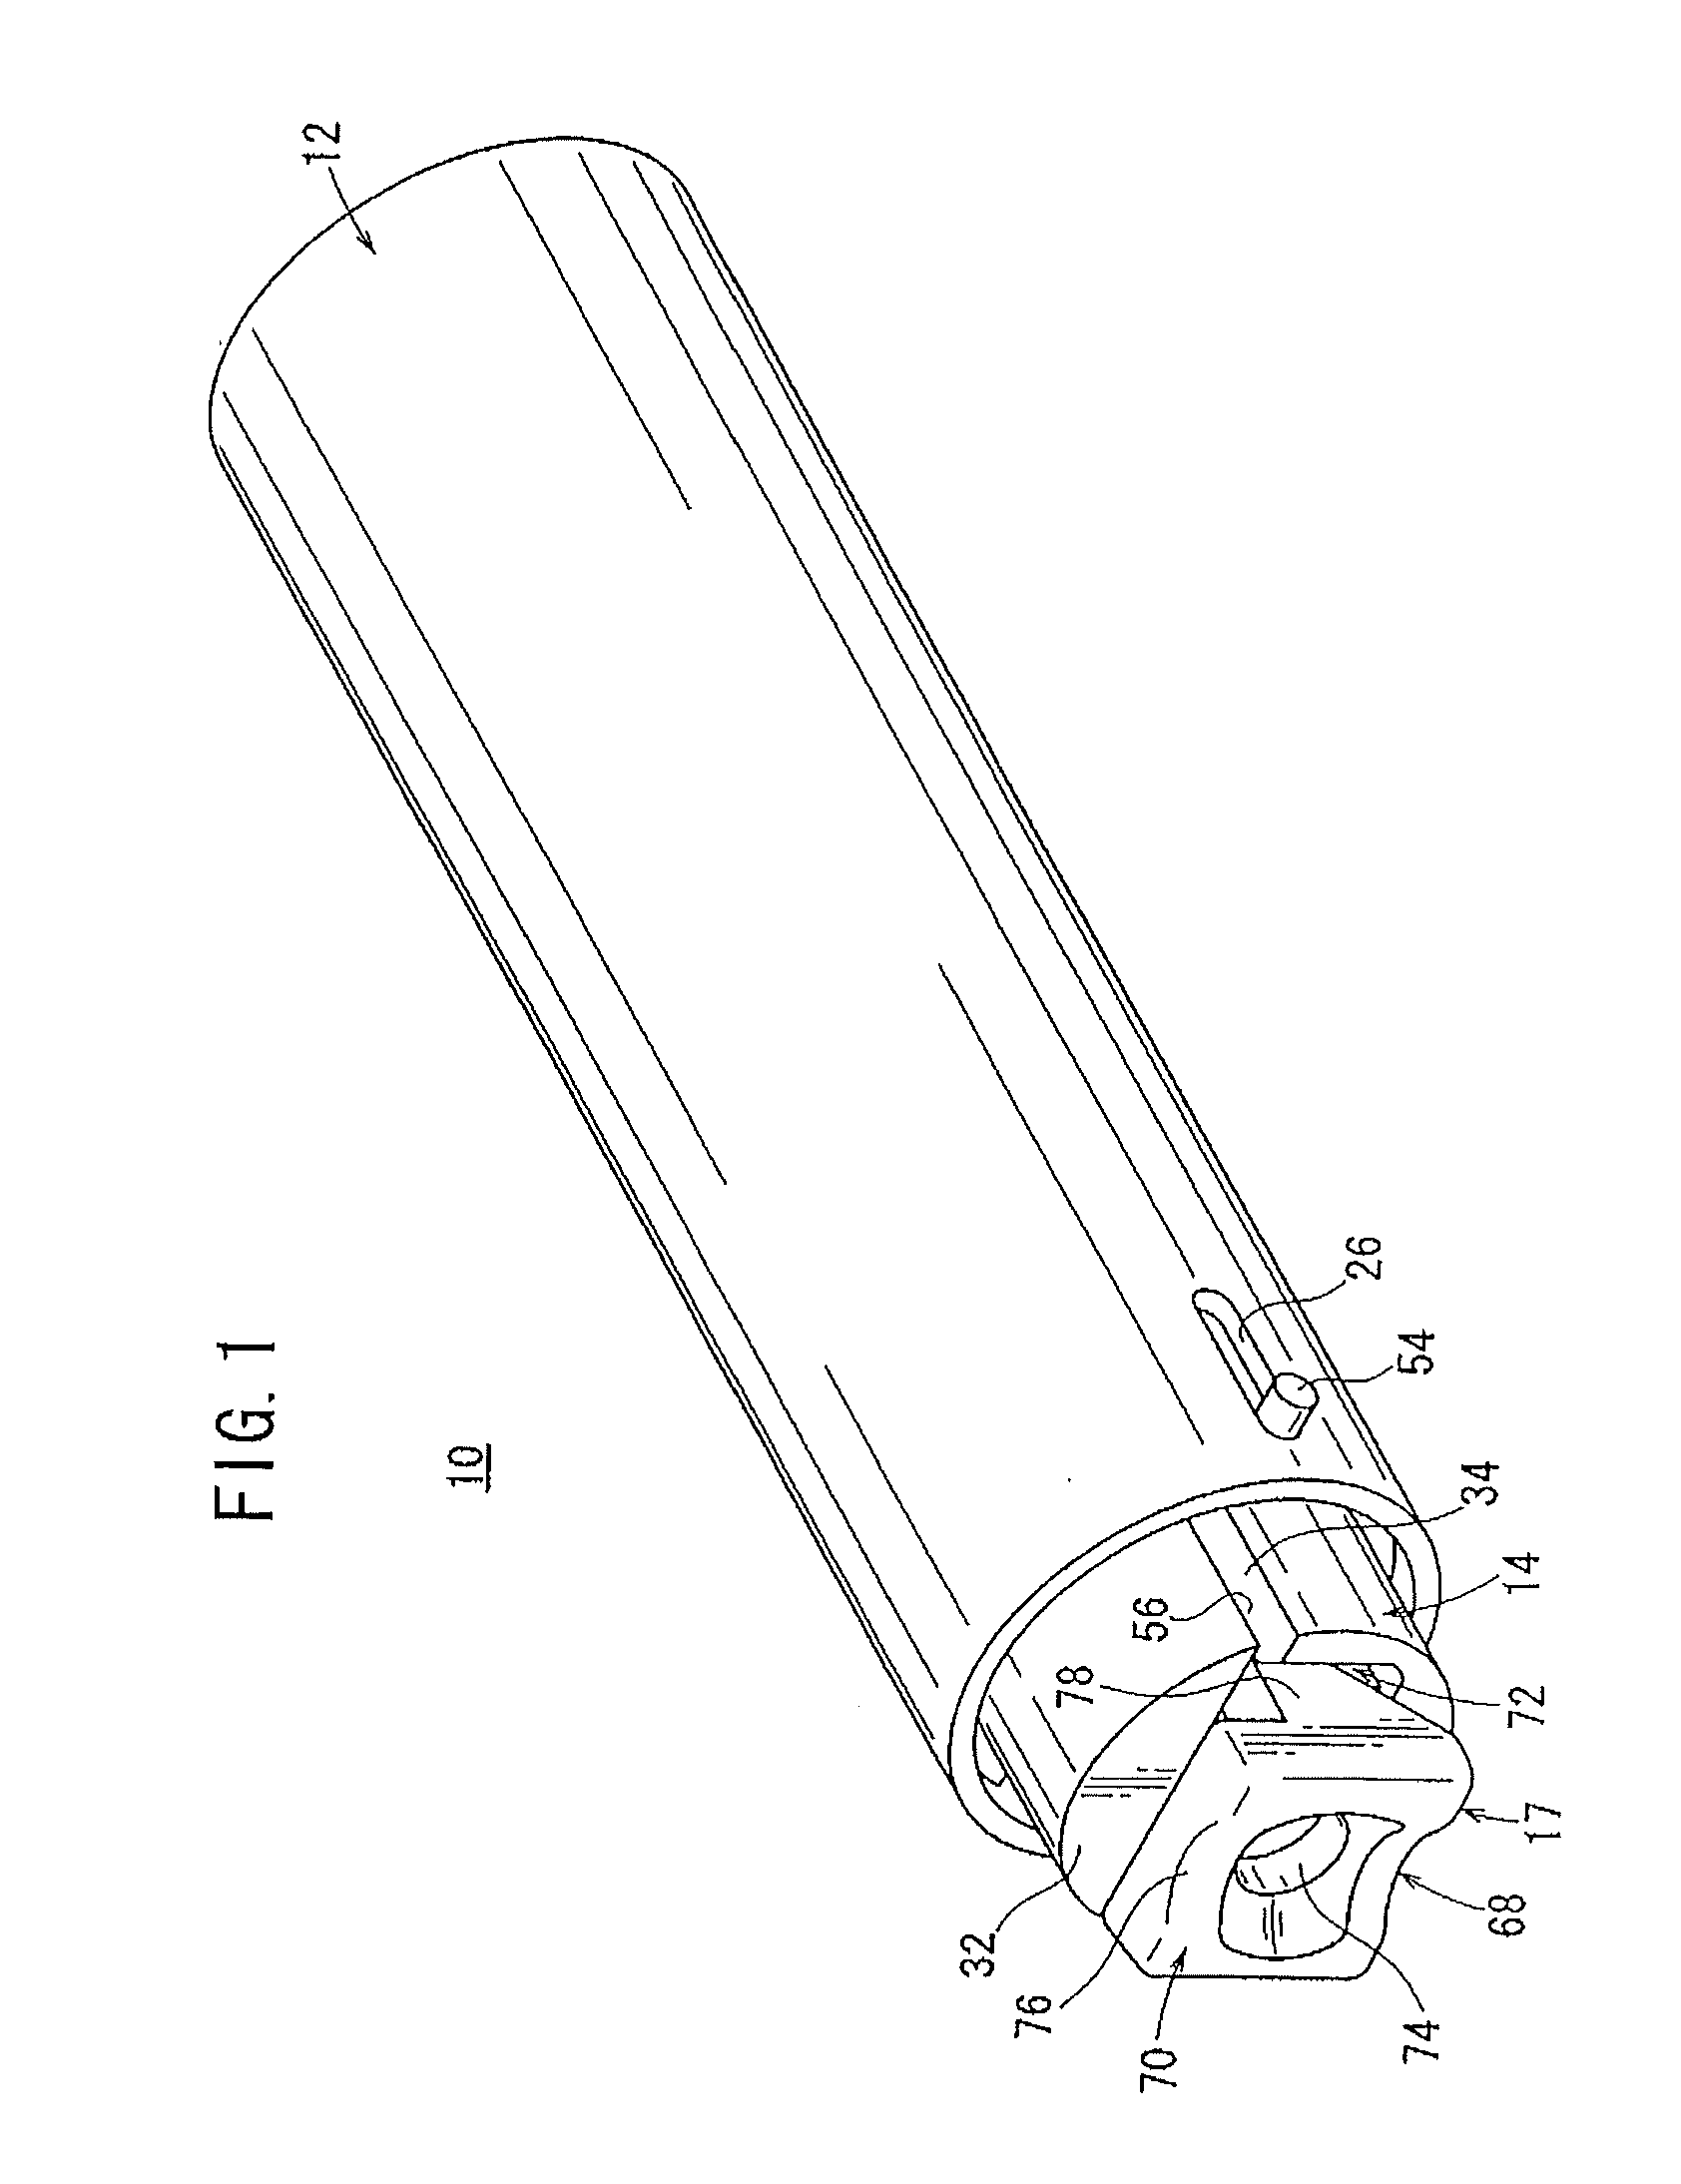 Blood component measurement device and tip for blood measurement